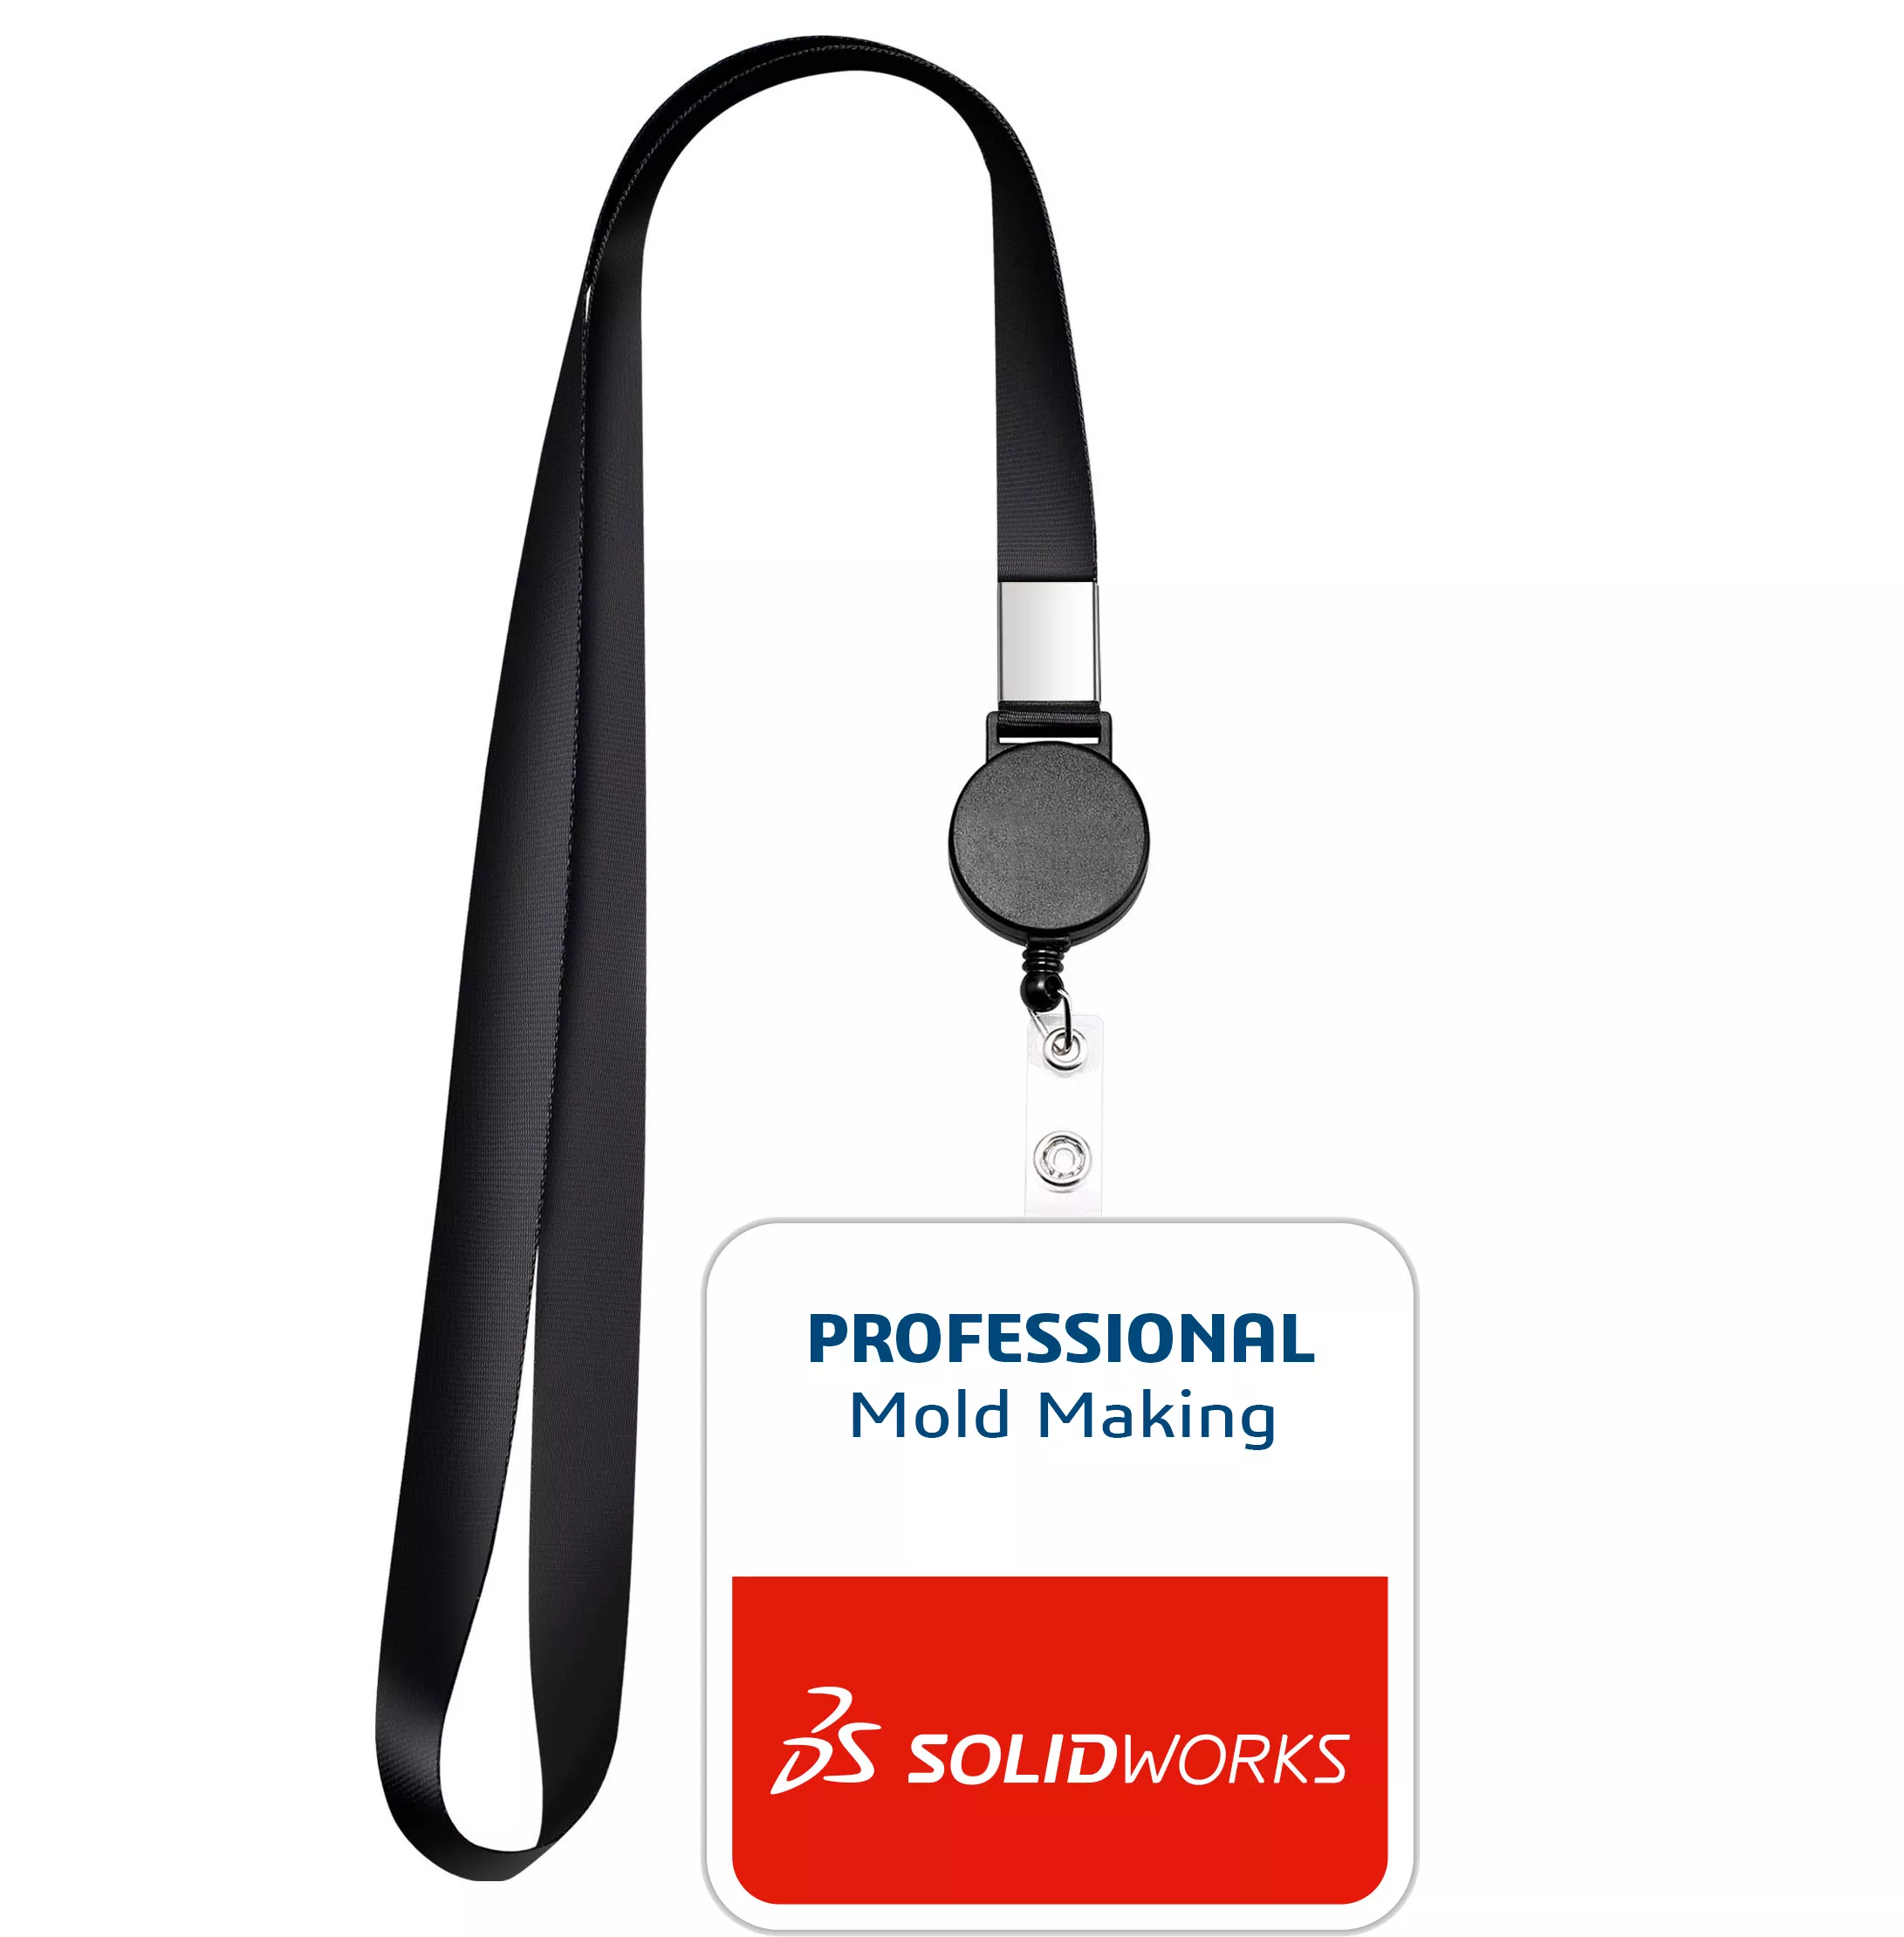 What skills may be required to pass the SOLIDWORKS CSWPA-Mold Making exam?